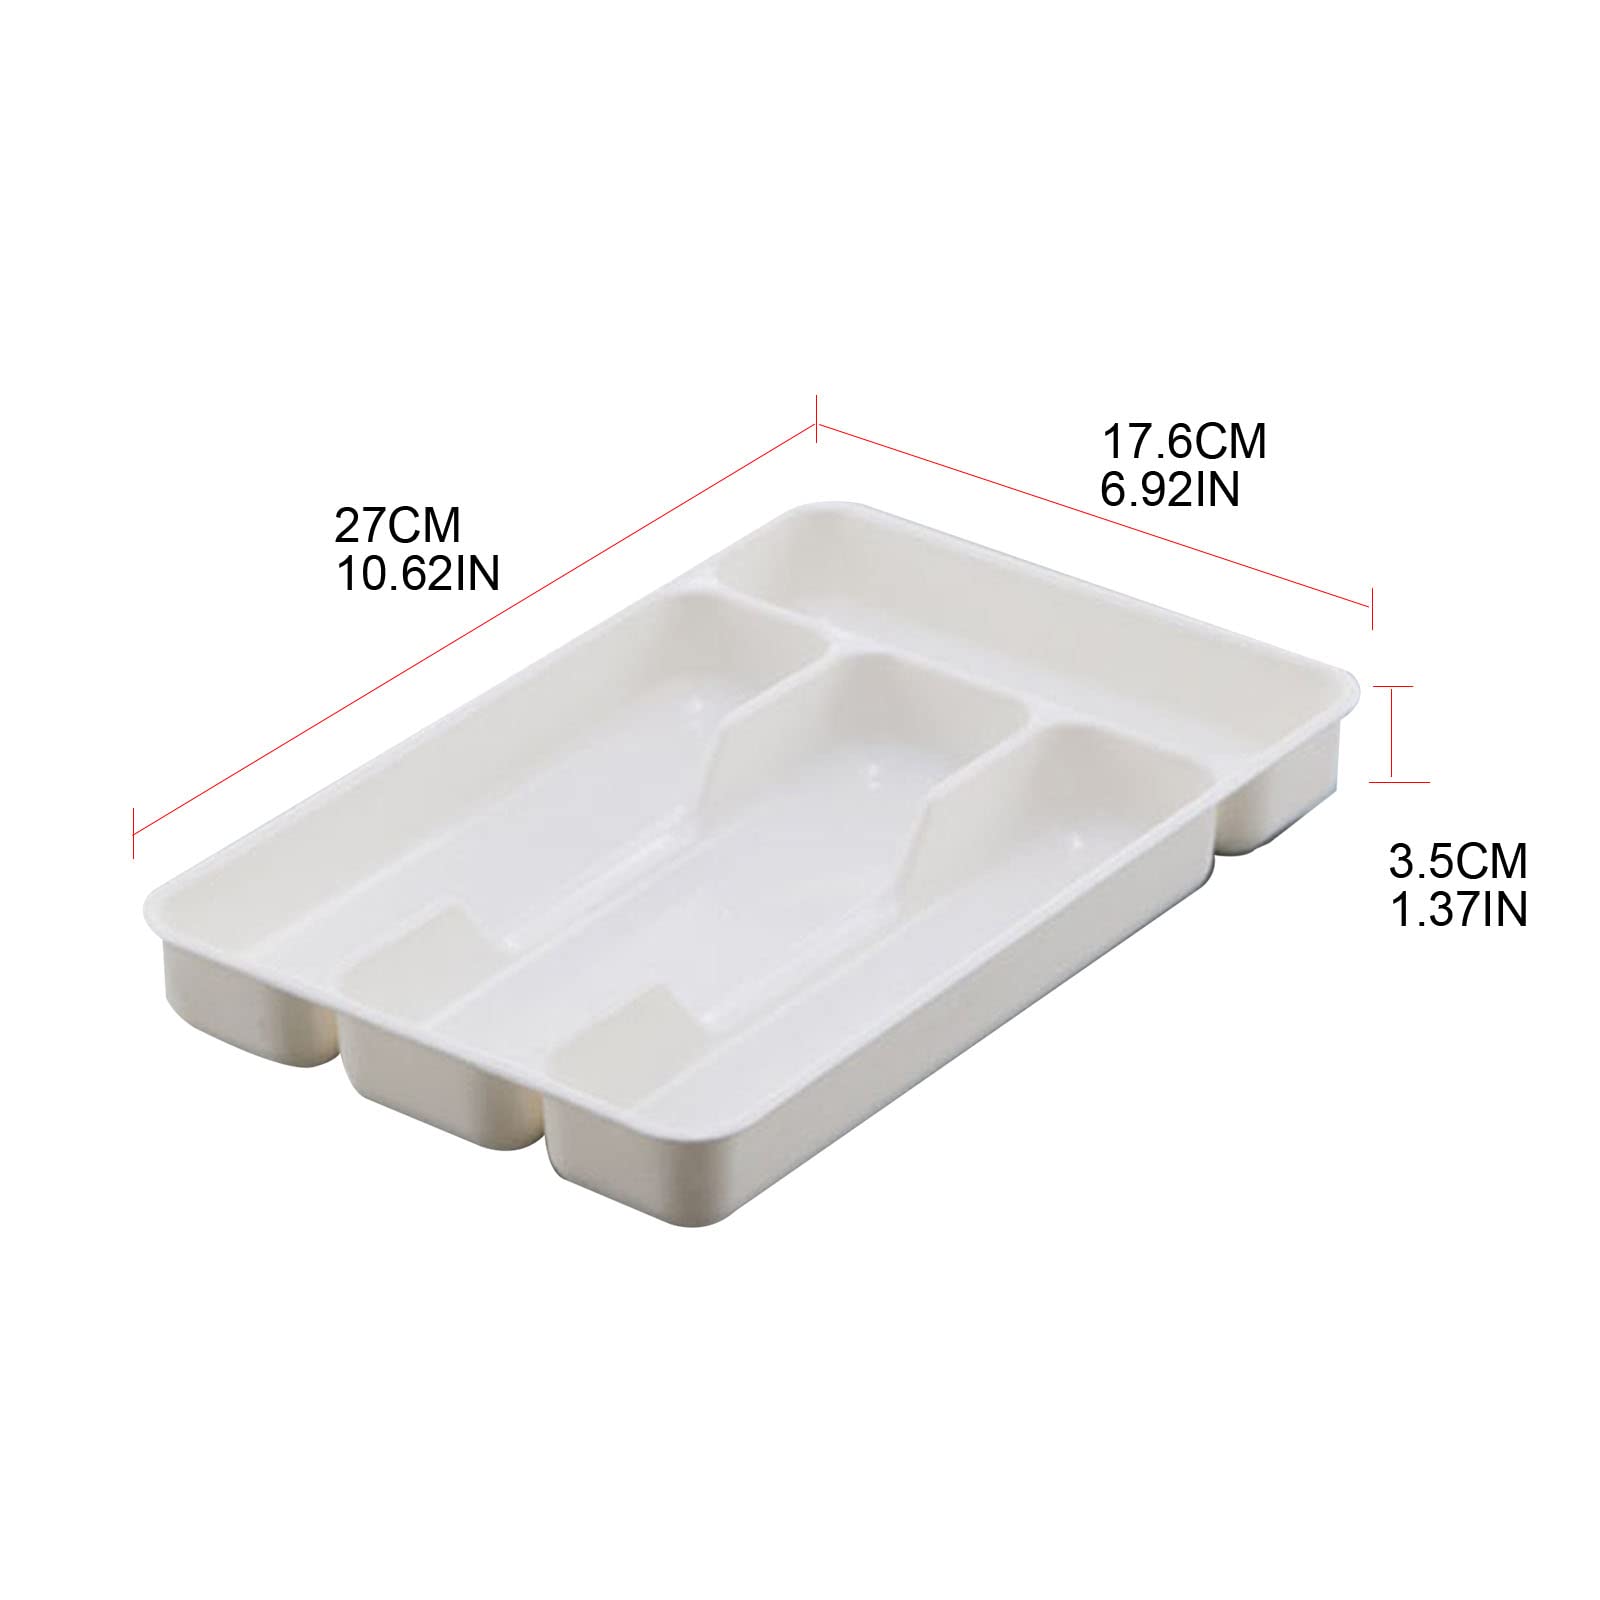 Woedpez 2pcs Cutlery Storage Tray Tableware Organizer Knife Spoon Fork Separation Box Kitchen Drawer Container for Cabinet Home tableware organizer box